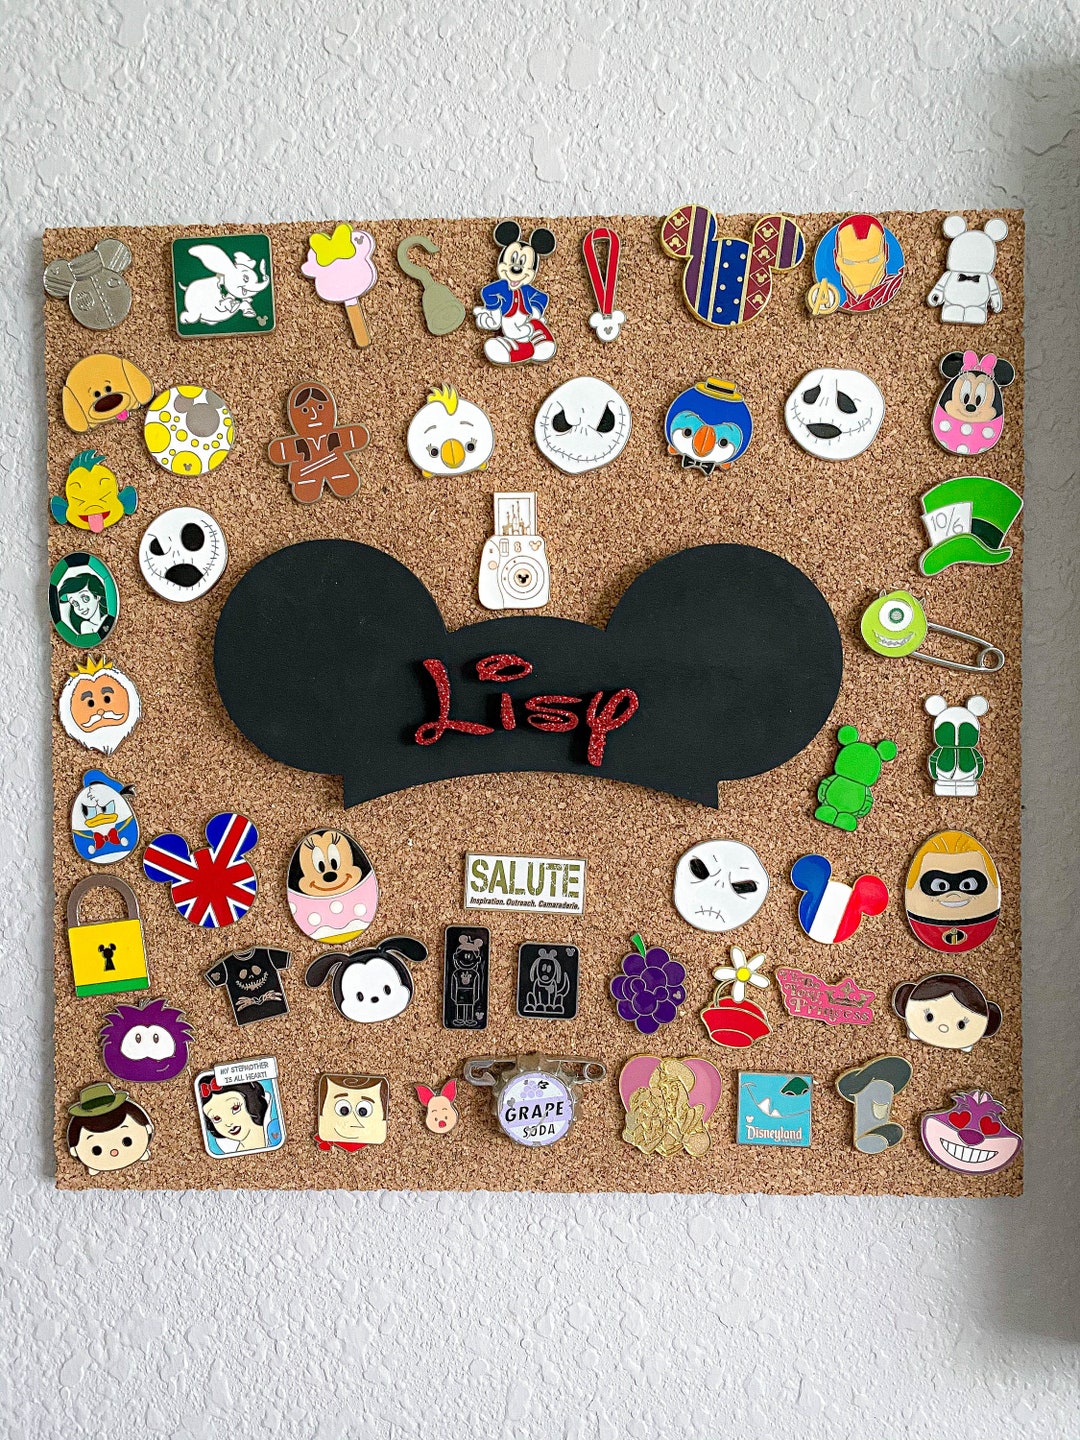 Mickey Mouse Cork Boards. Mickey Pin Display. Disney Pin Board, Mickey Pin  Board. Black Mickey Pin Display. Painted Mickey Cork Board 